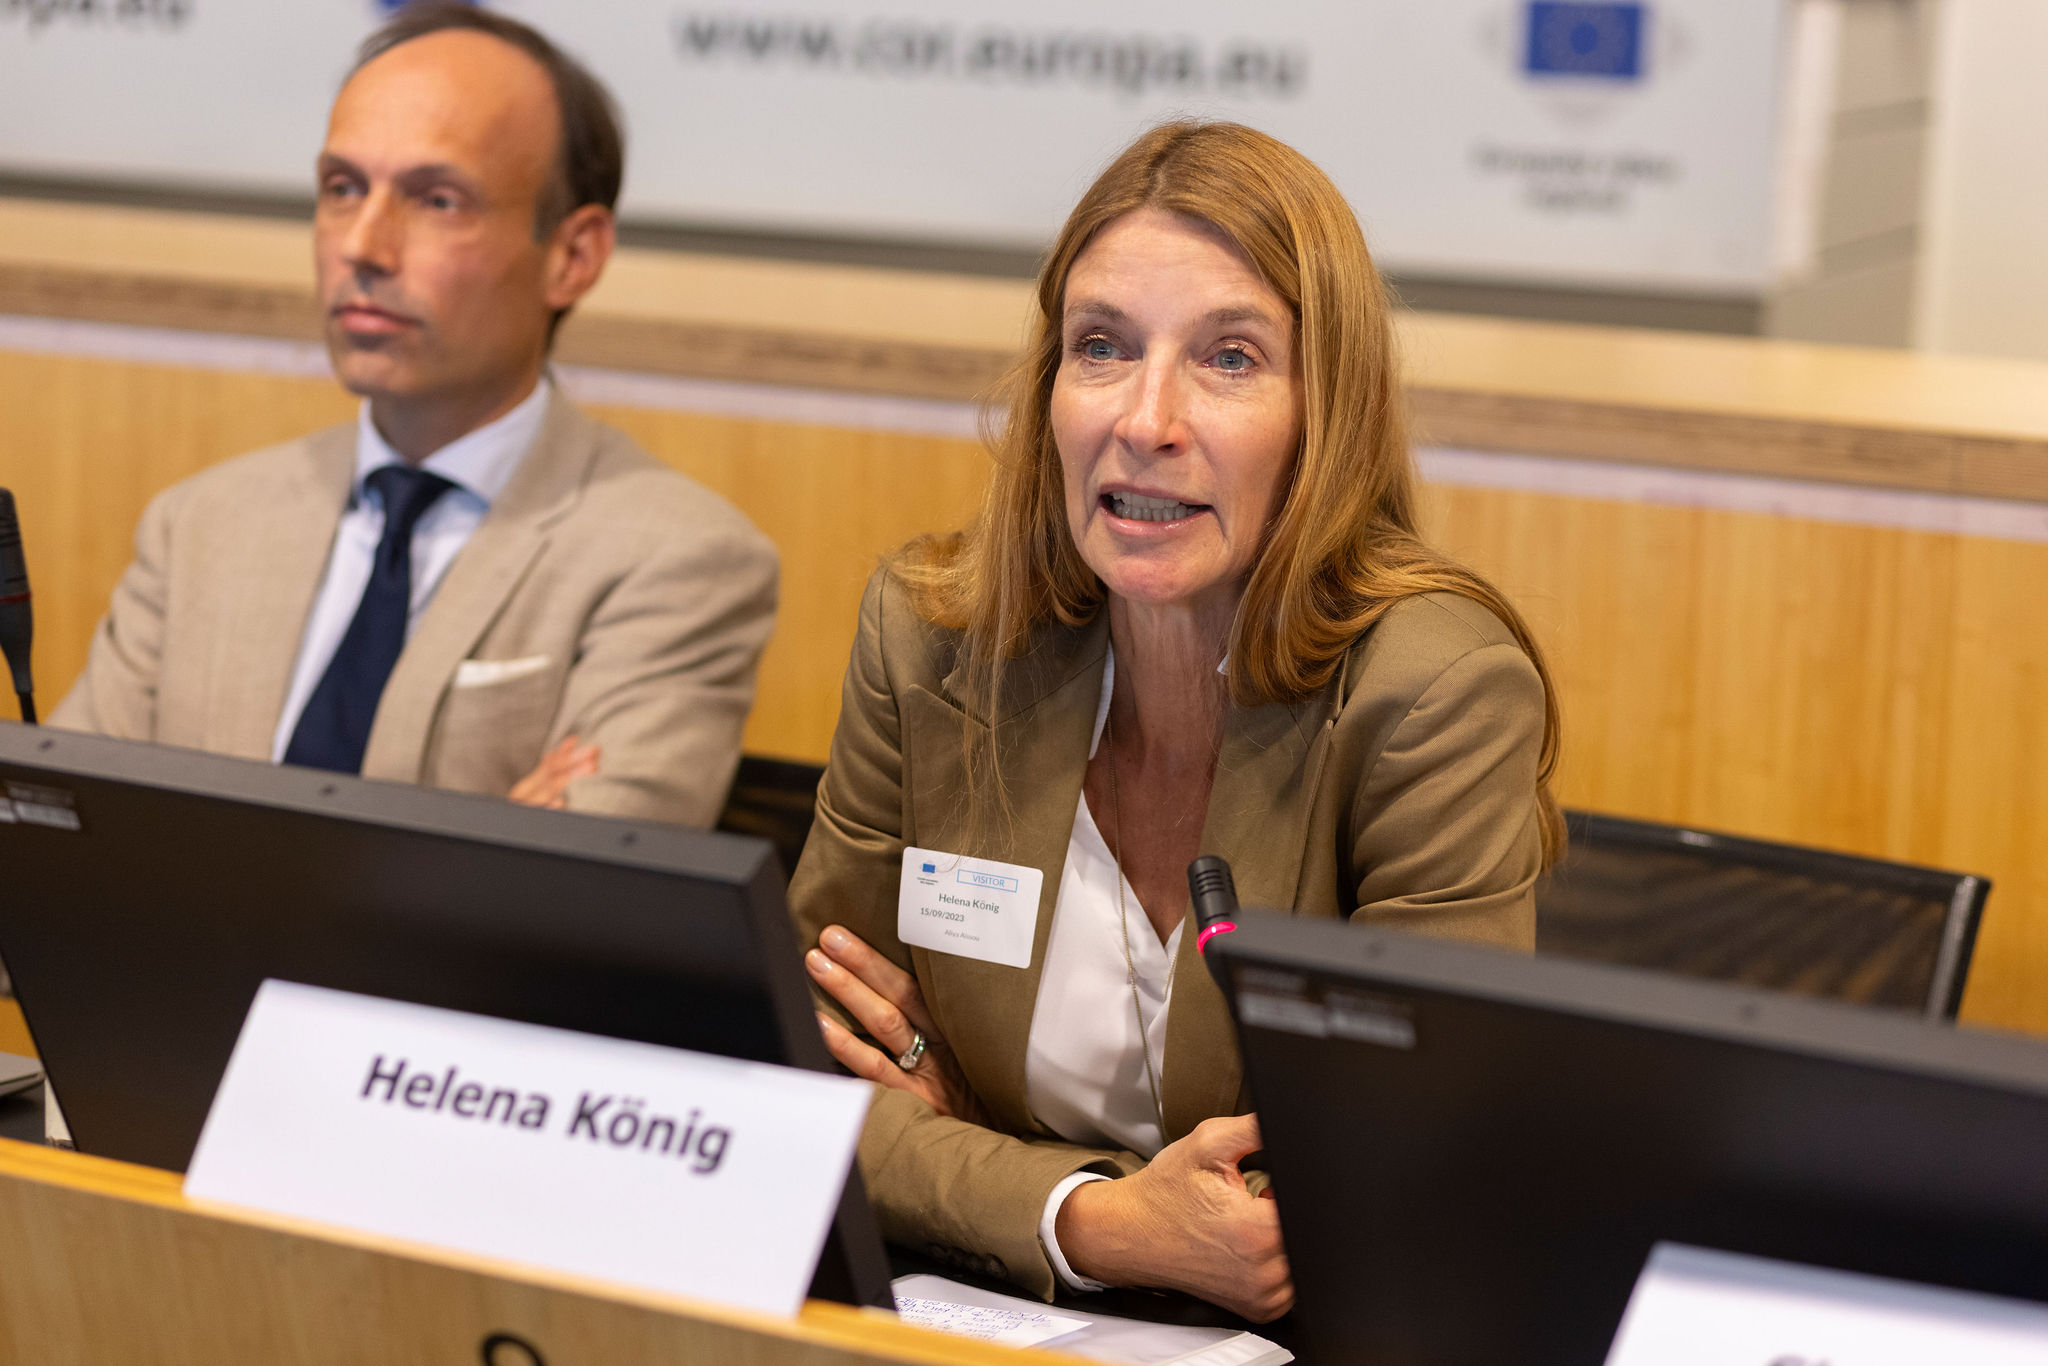 “We moved from considering democracy support as a development issue to seeing it as an overarching priority.”, Helena König, Deputy Secretary General of the European External Action Service. She stressed the need for the EU to do more, including through innovative measures and strengthened support for youth activism.